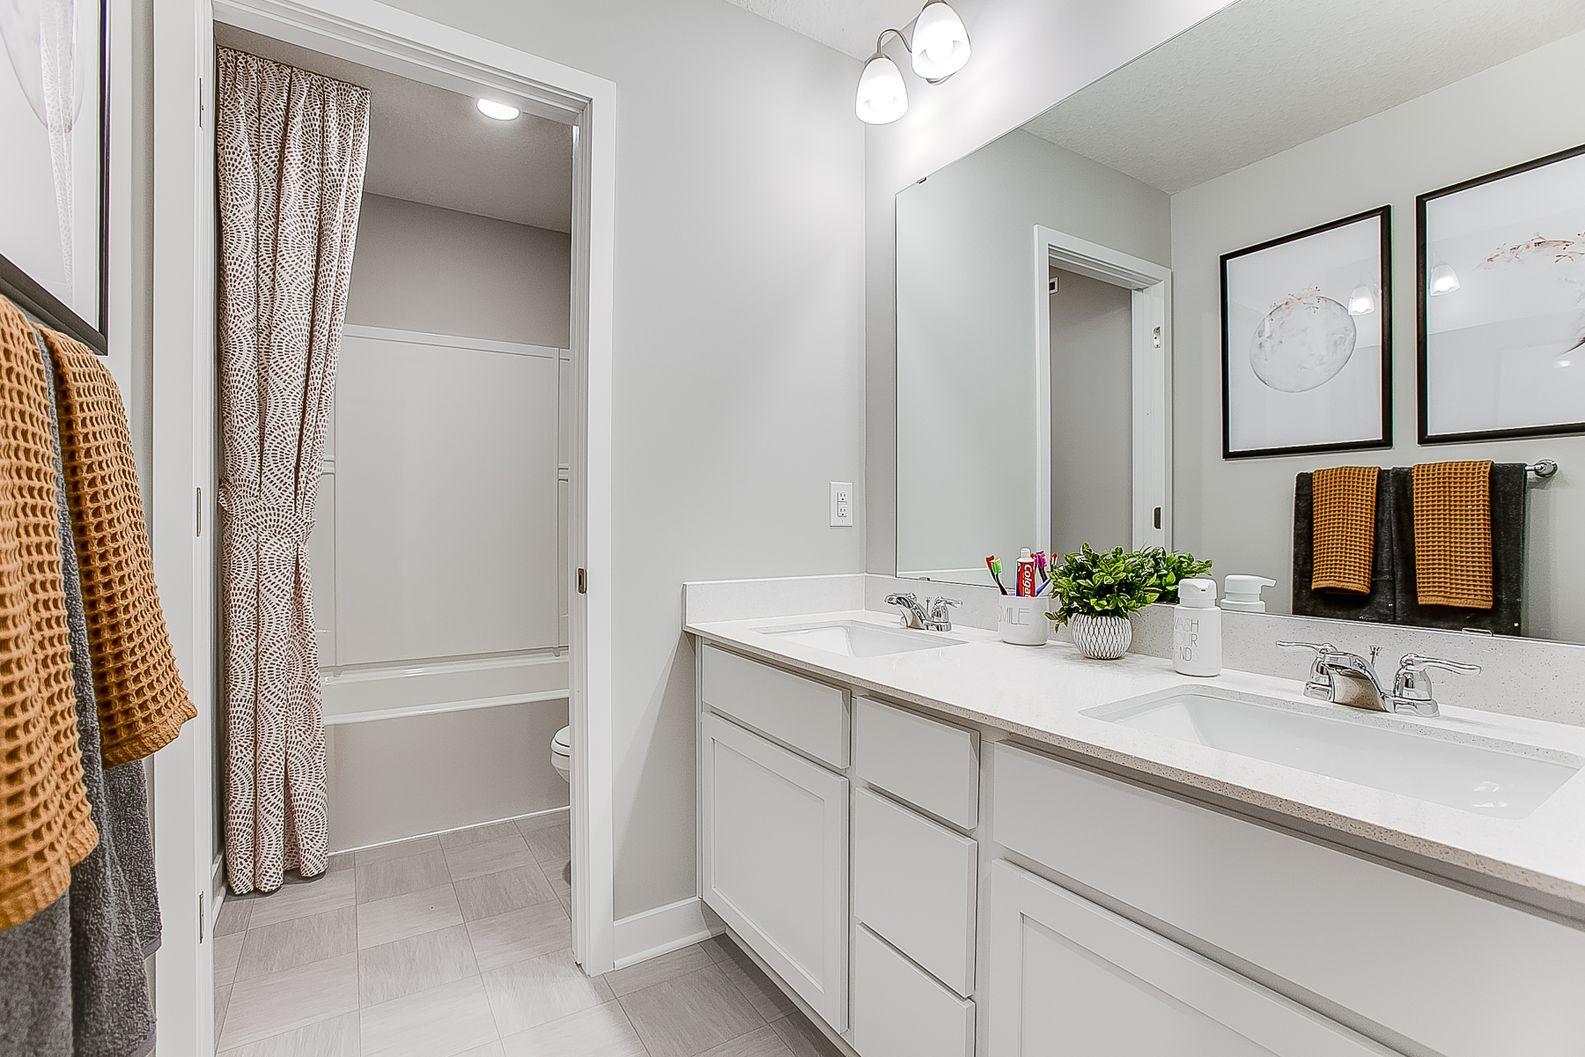 The upper-level hall bathroom also features 2 sinks with Quartz counters and separate tub/shower and toilet area.